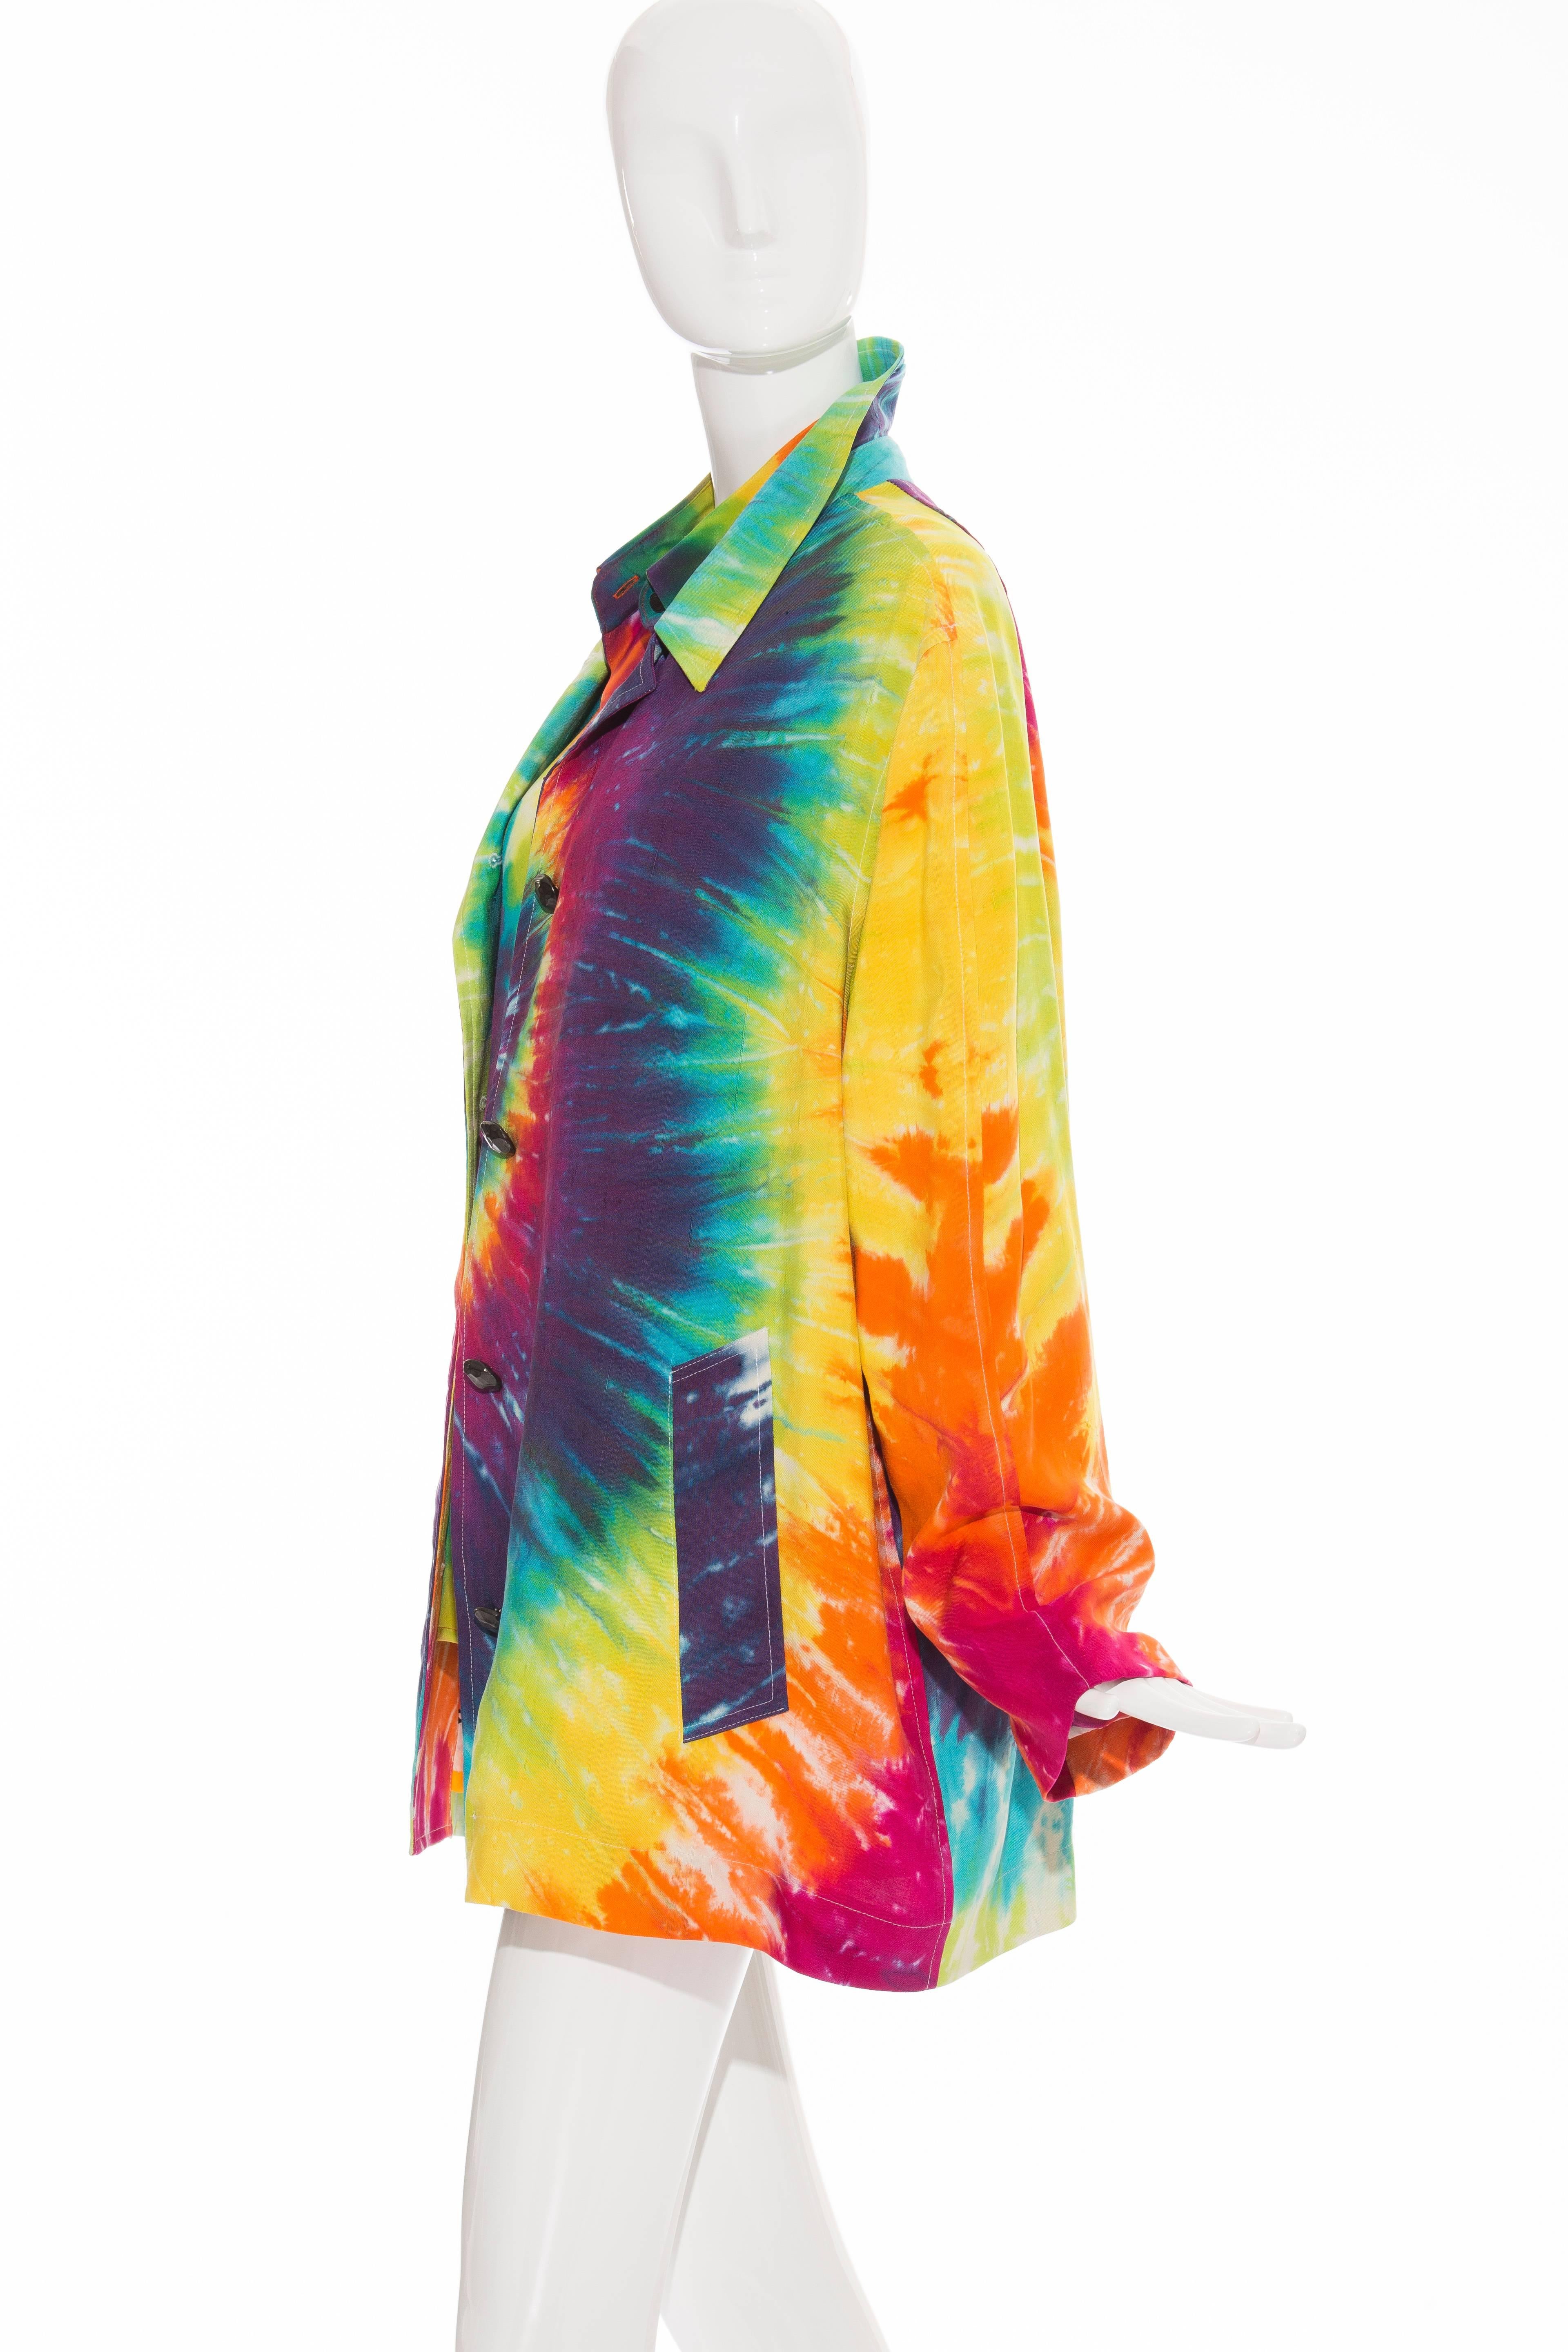 Todd Oldham Tie-Dye Jacket And Blouse, Spring 1994 1